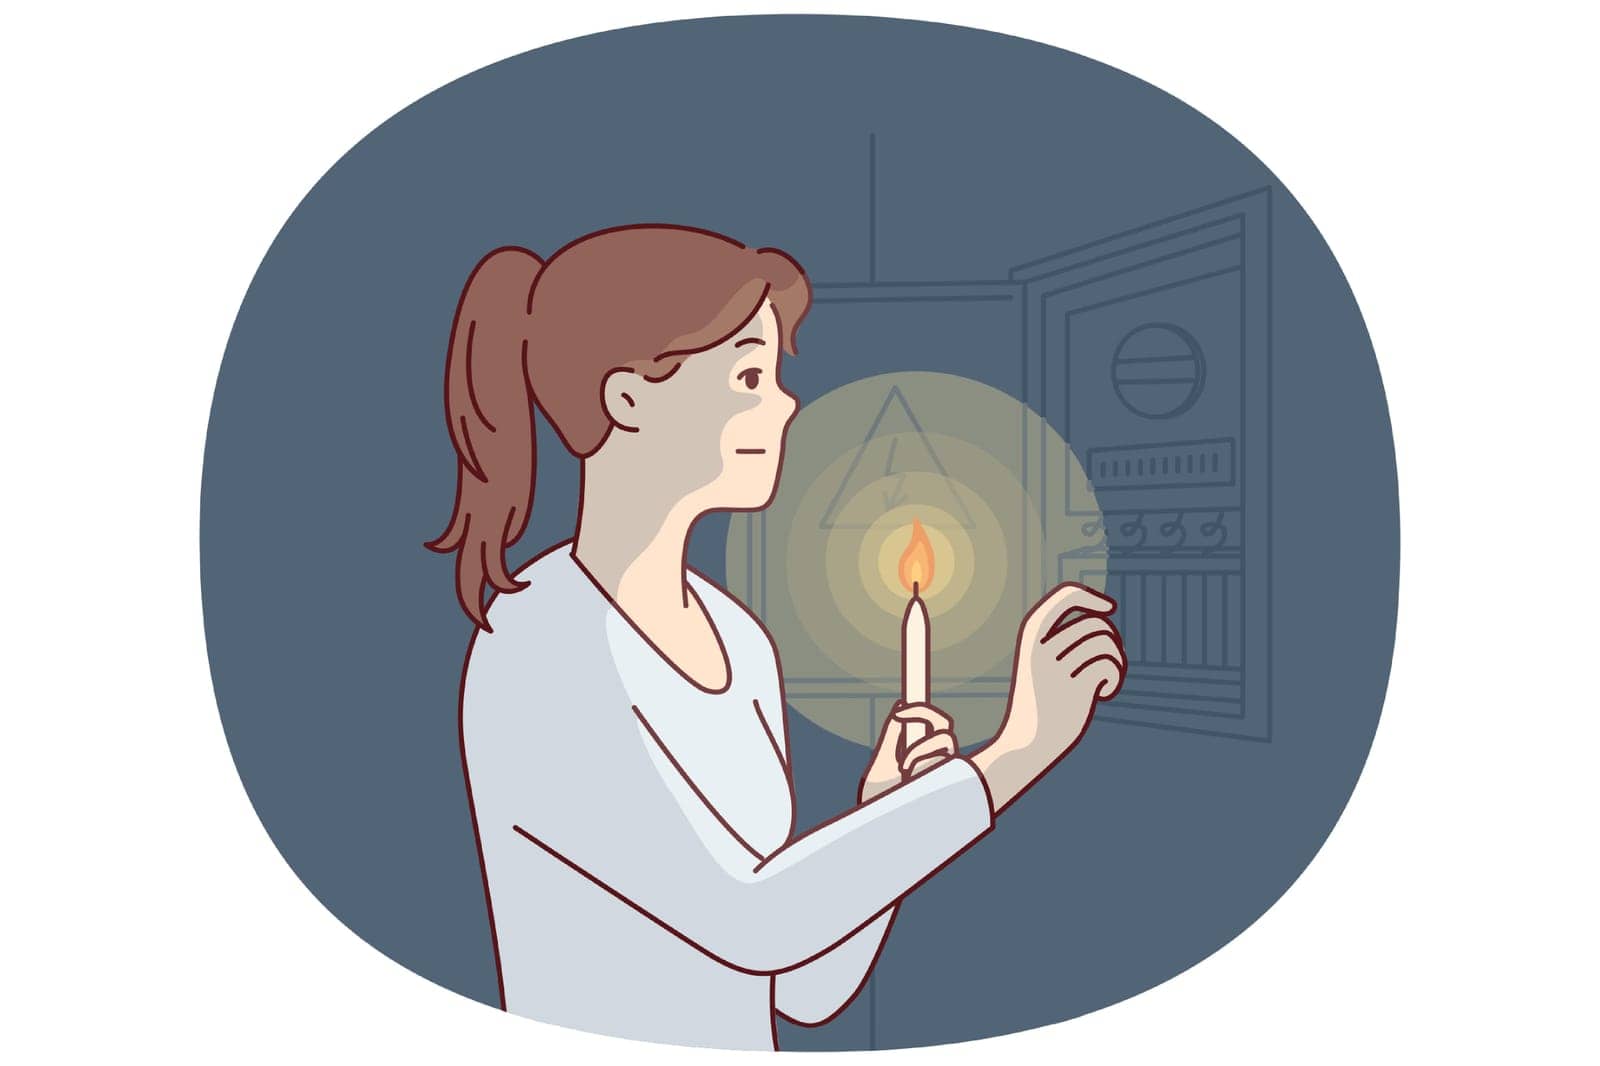 Independent woman with burning candle approaches power shield to find out reason for energy outage. Girl restores electrical wiring with own hands after loss of electricity. Flat vector illustration